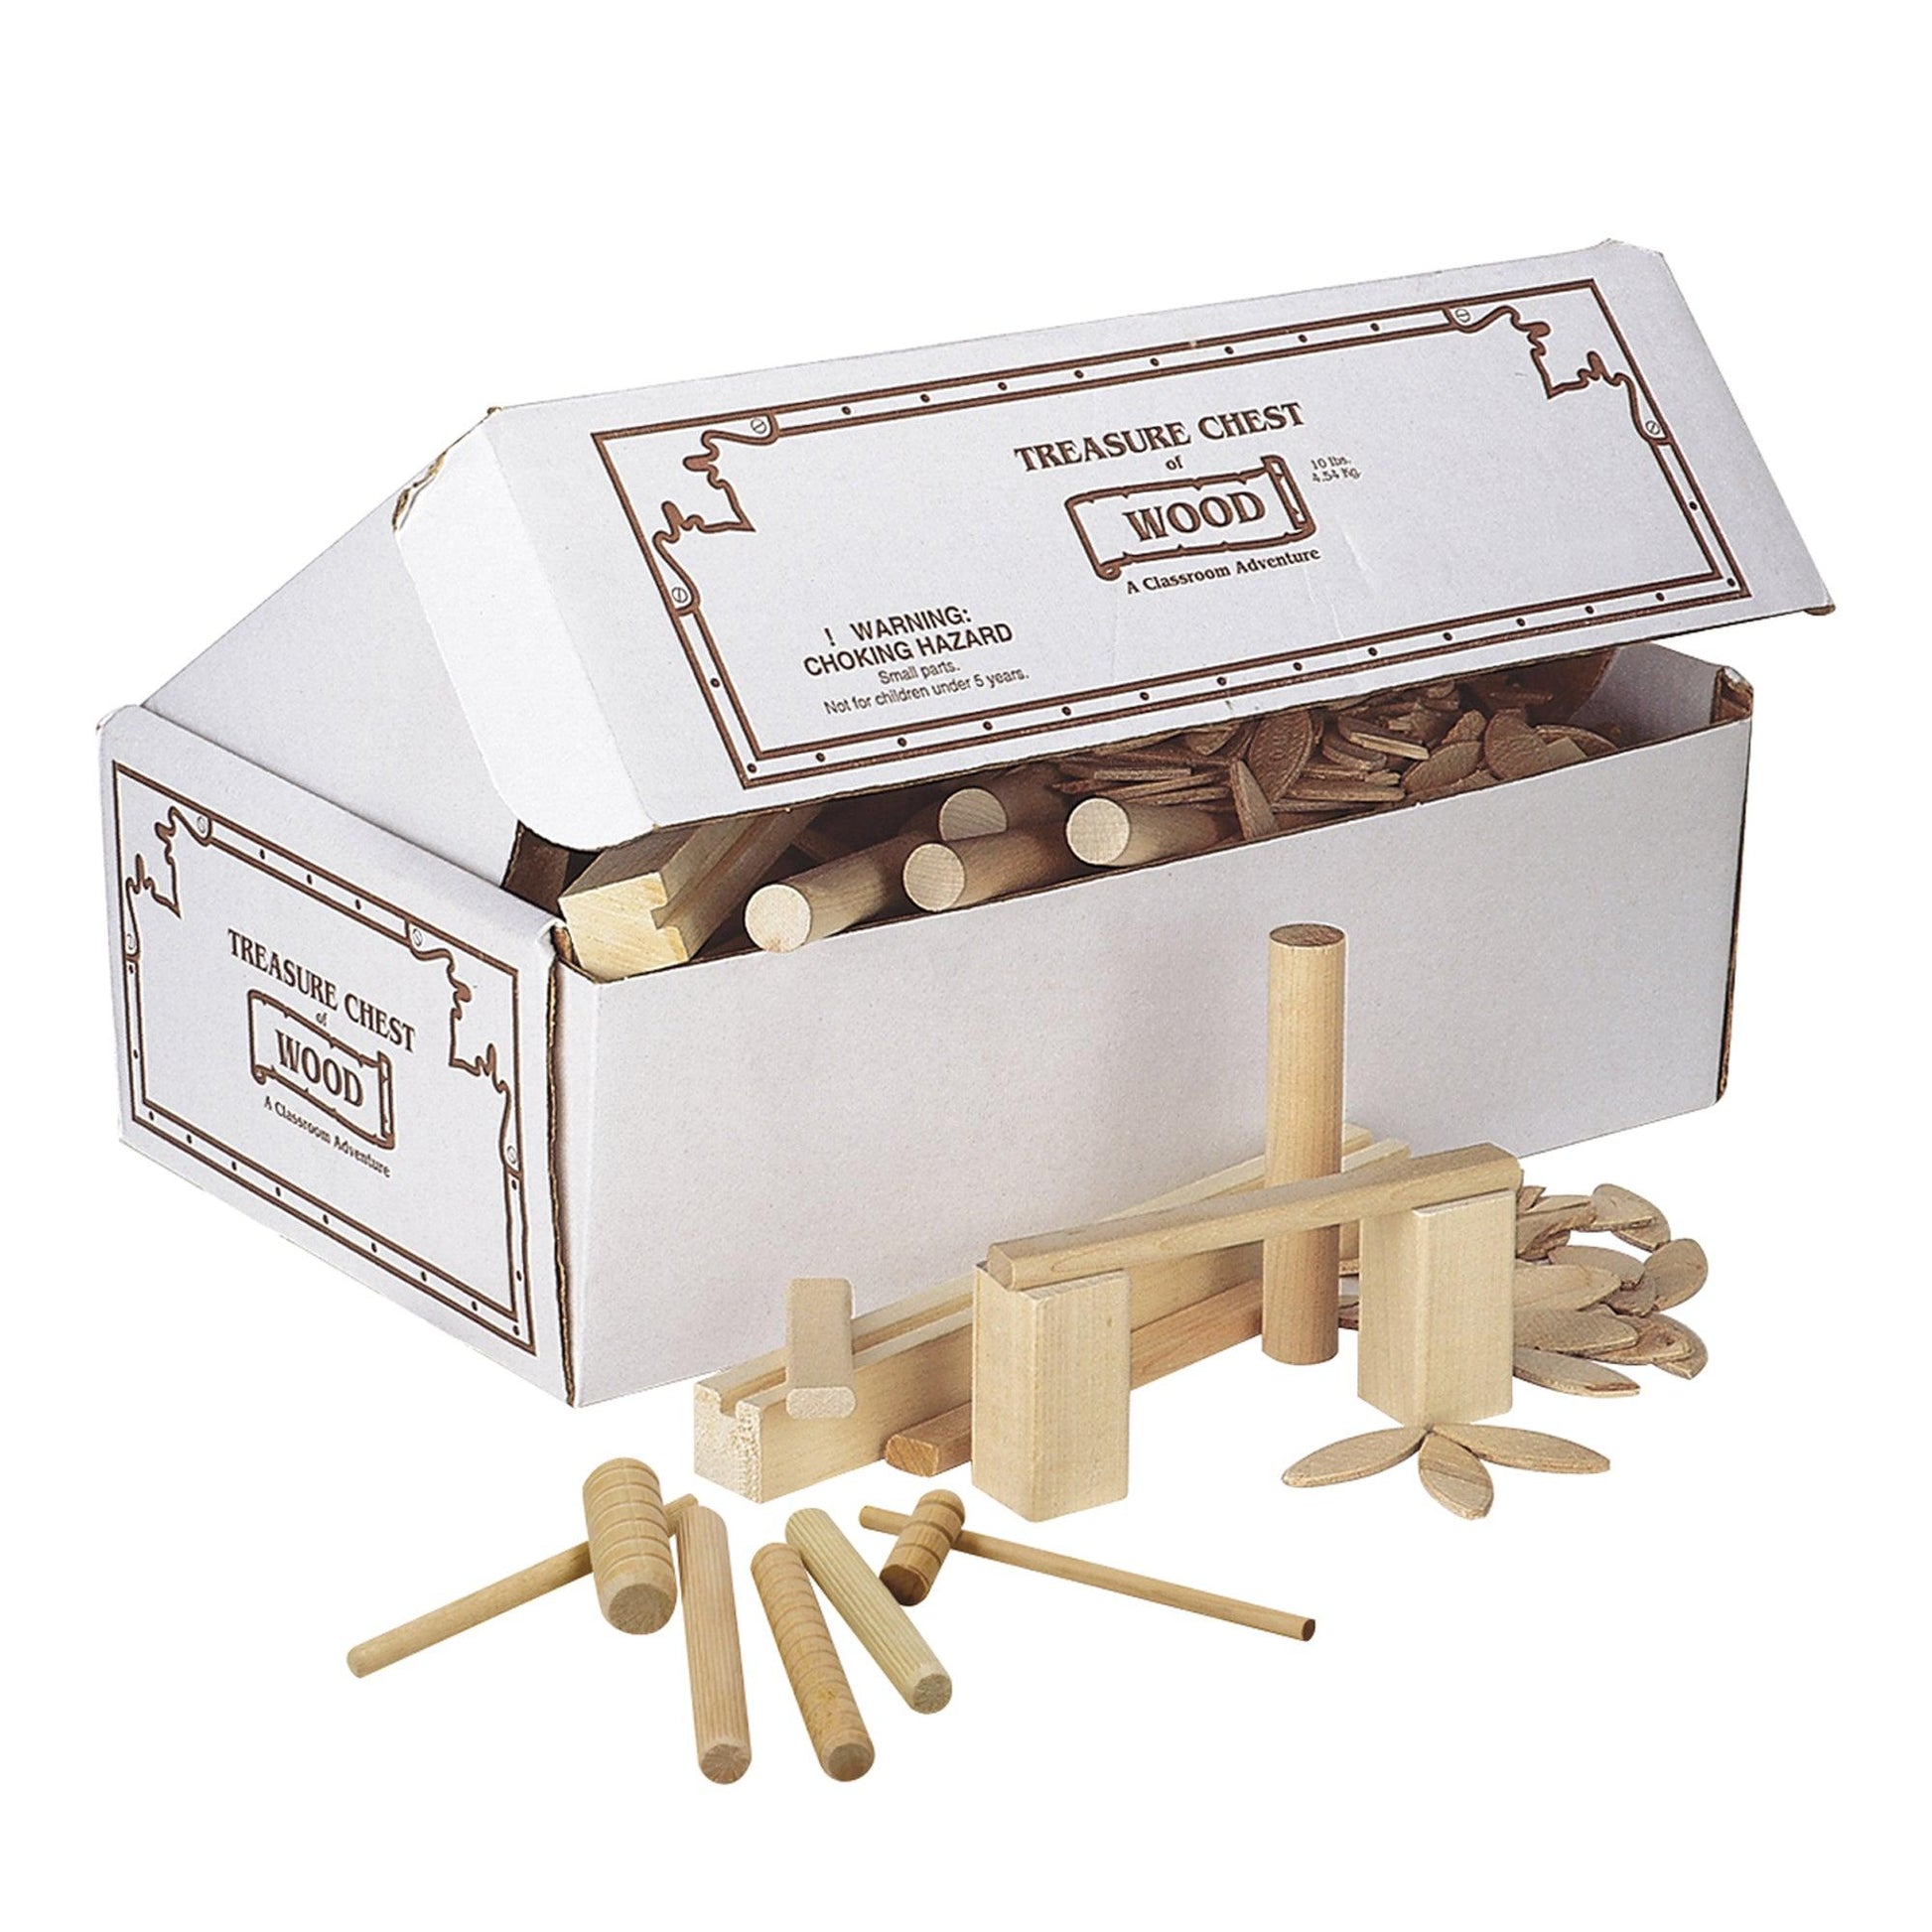 Treasure Chest of Wood, Assorted Shapes & Sizes, 10 lb. - Loomini